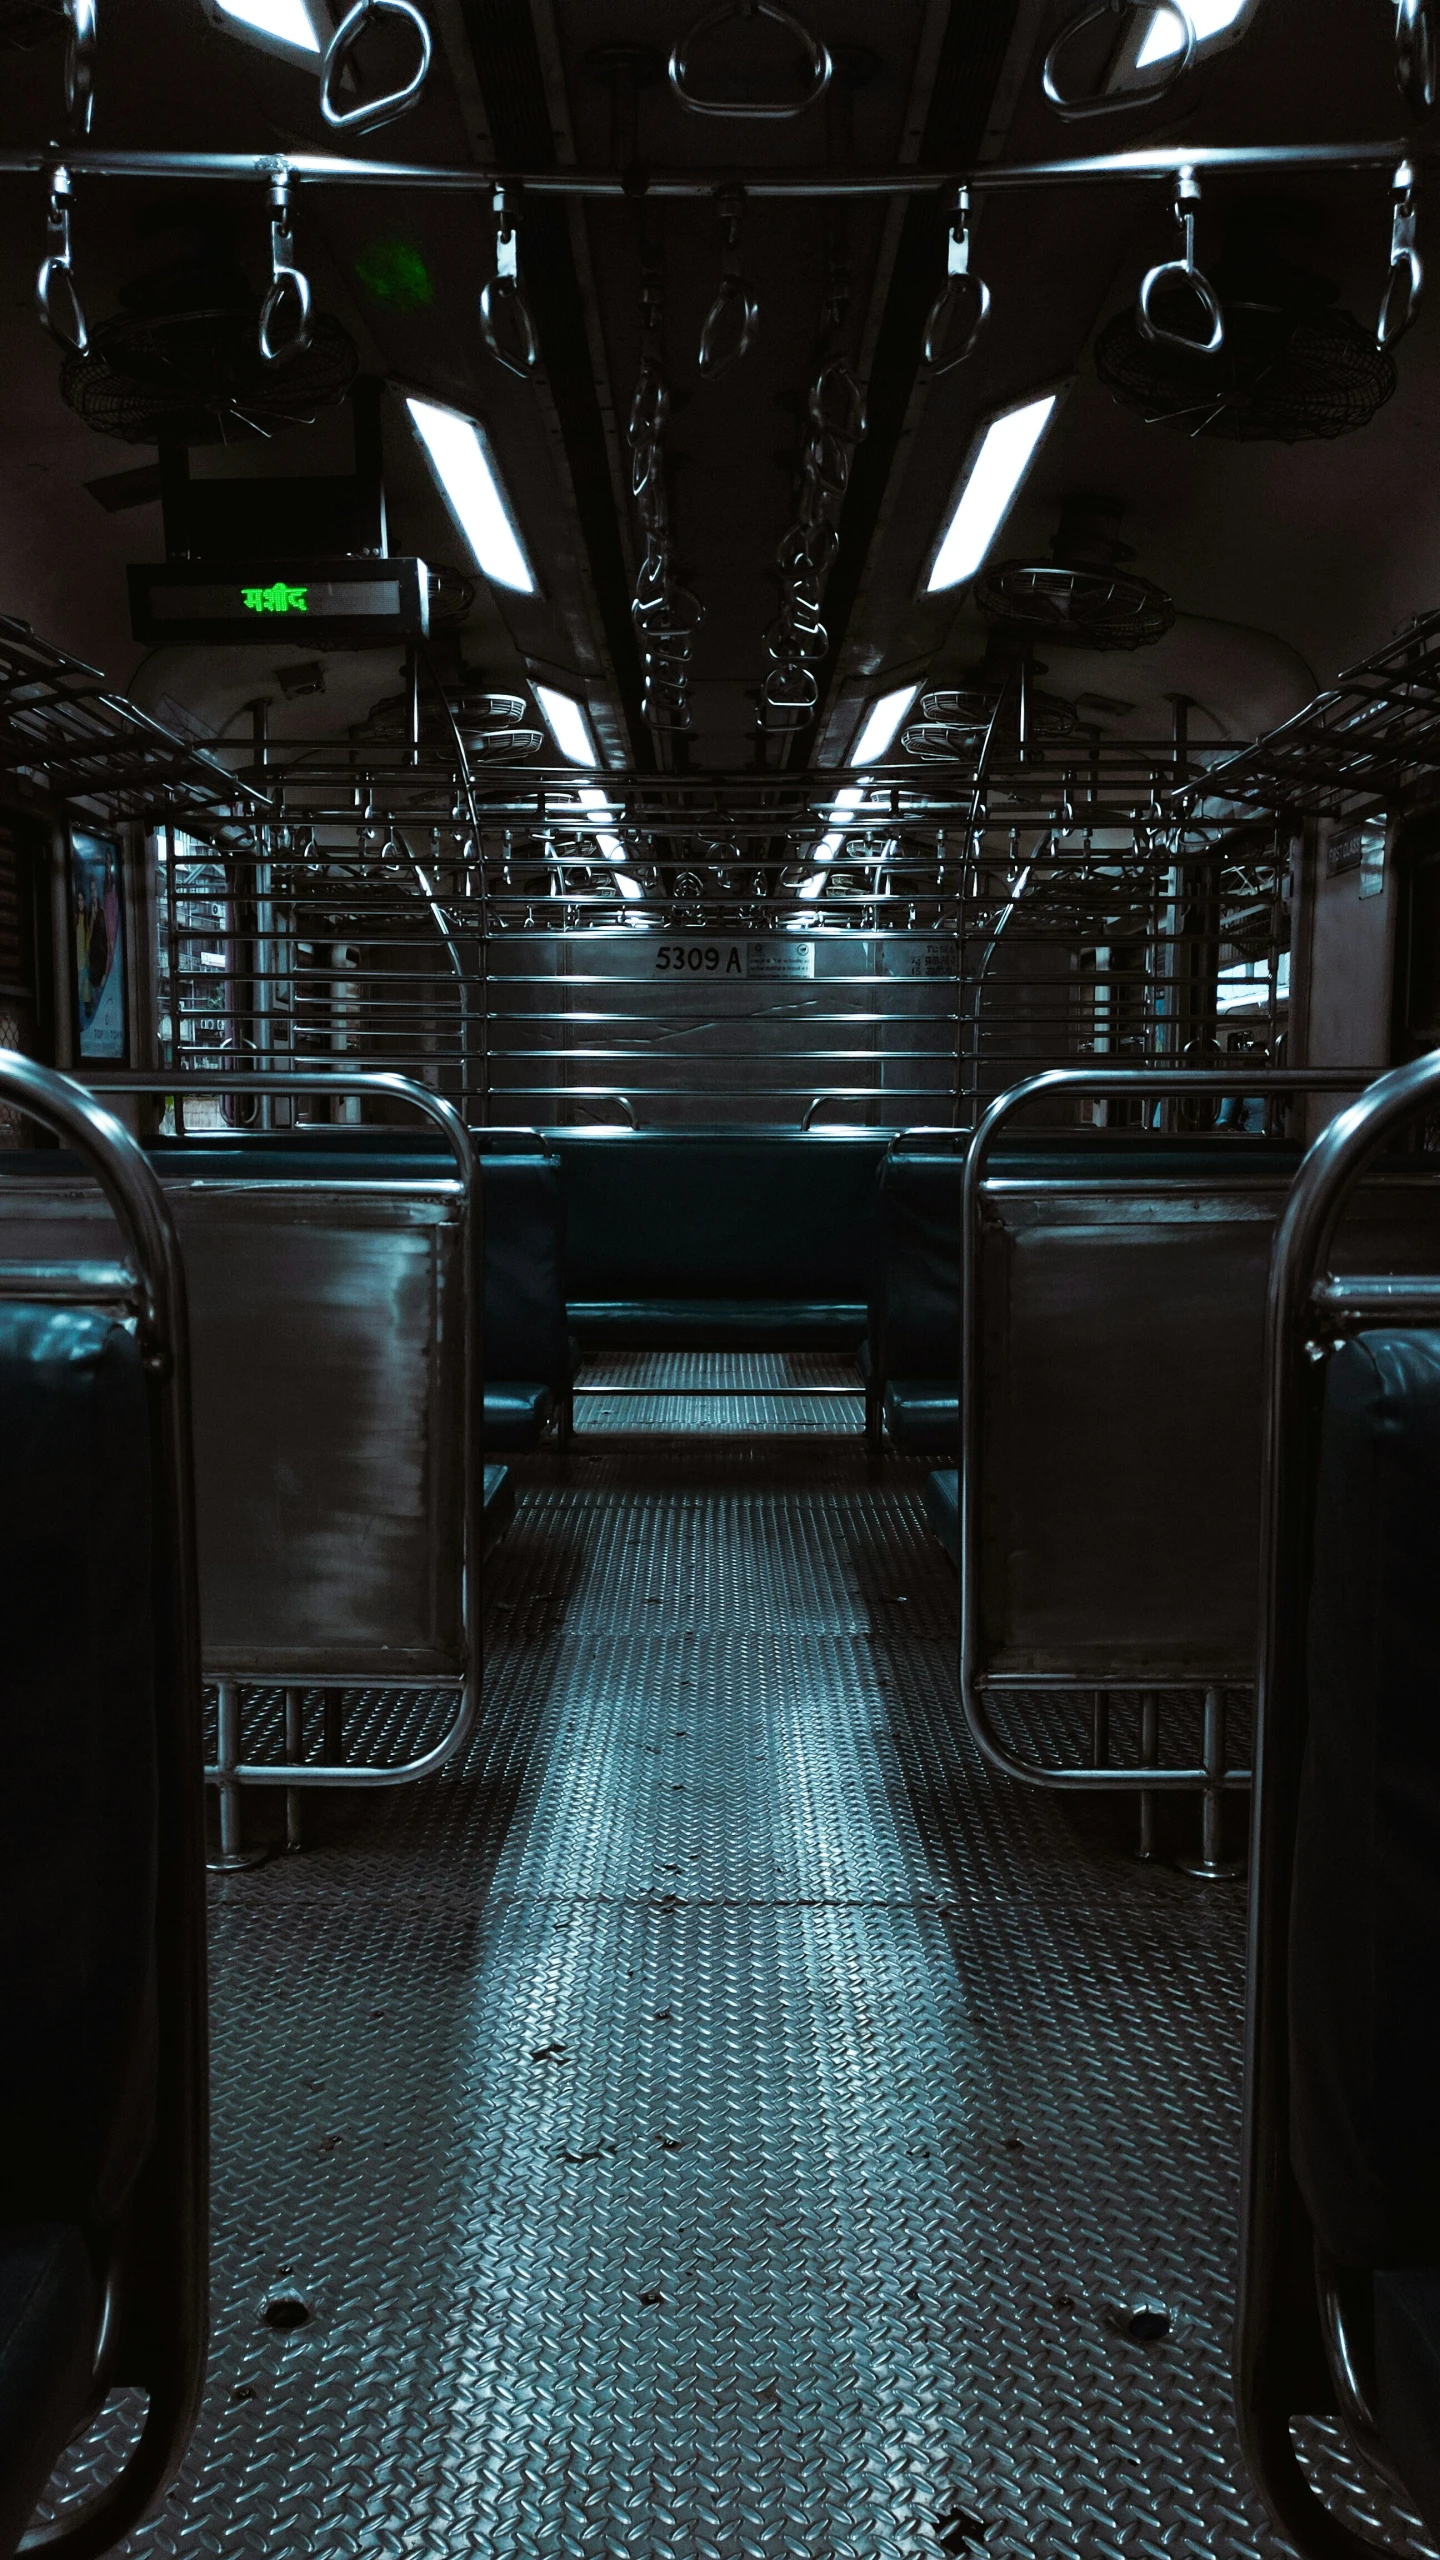 view inside the vehicle of another vehicle in a very dark place